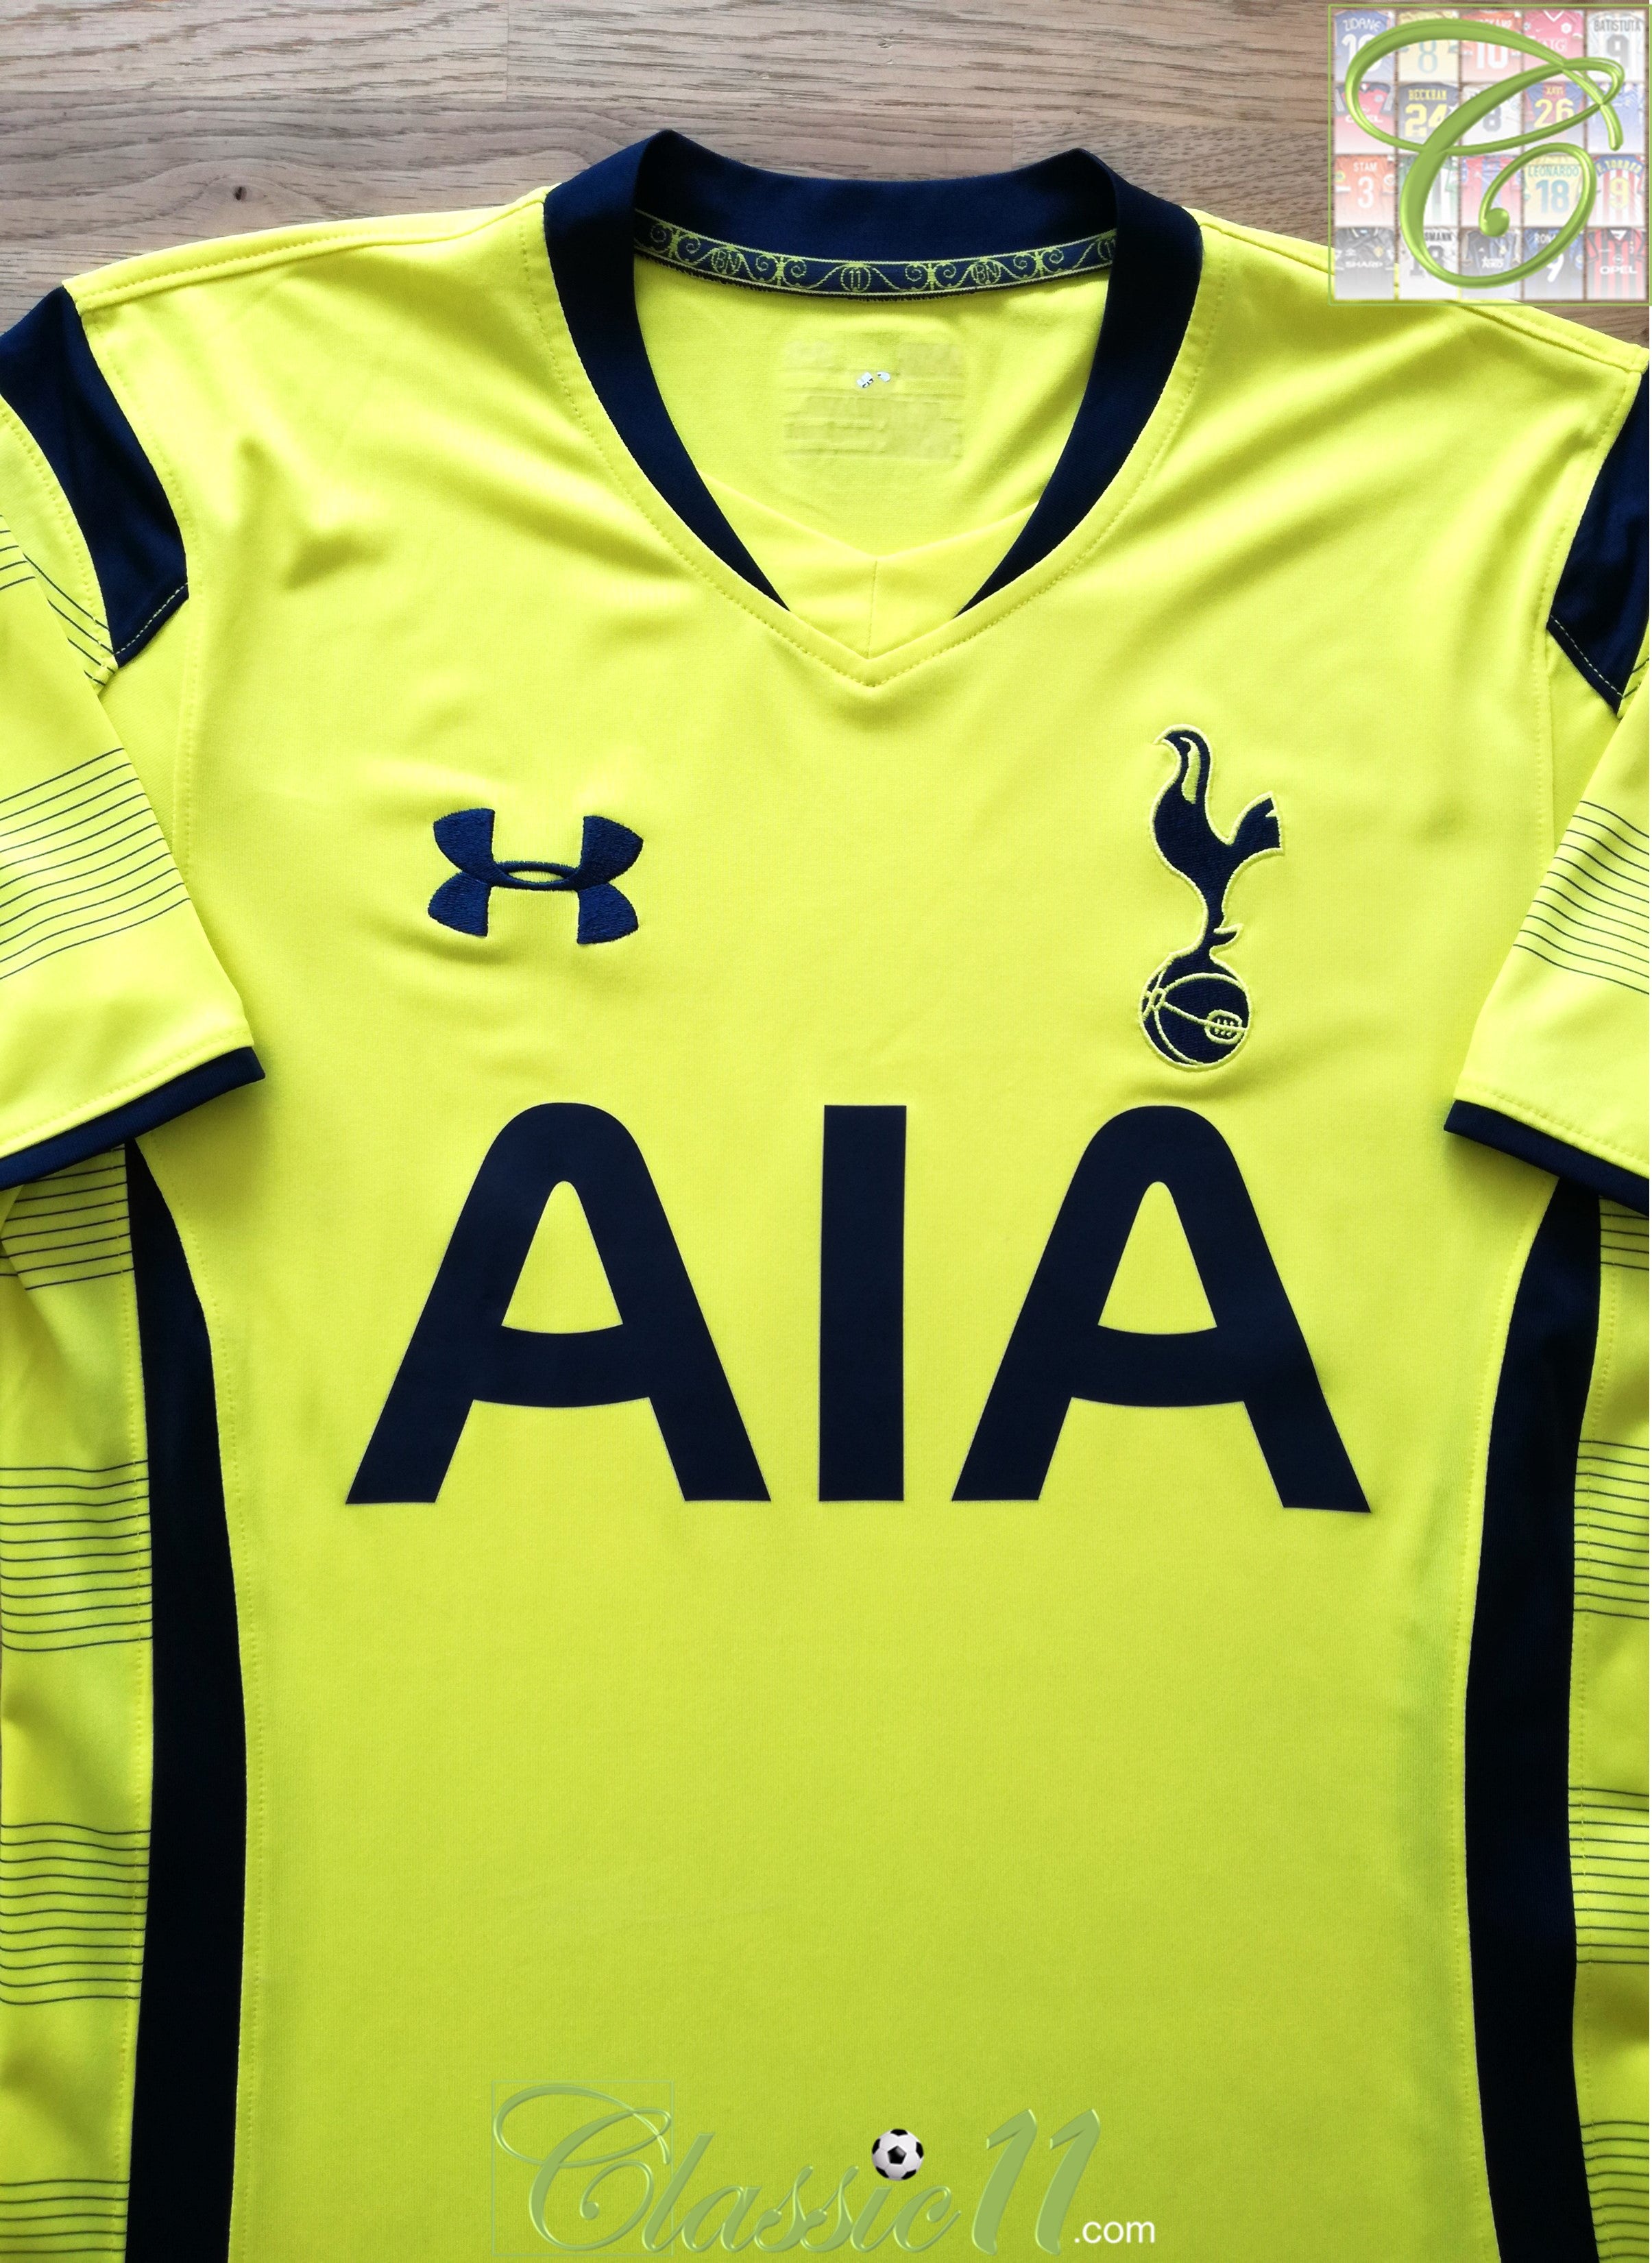 Spurs 15/16 3rd Kit by Under Armour - SoccerBible